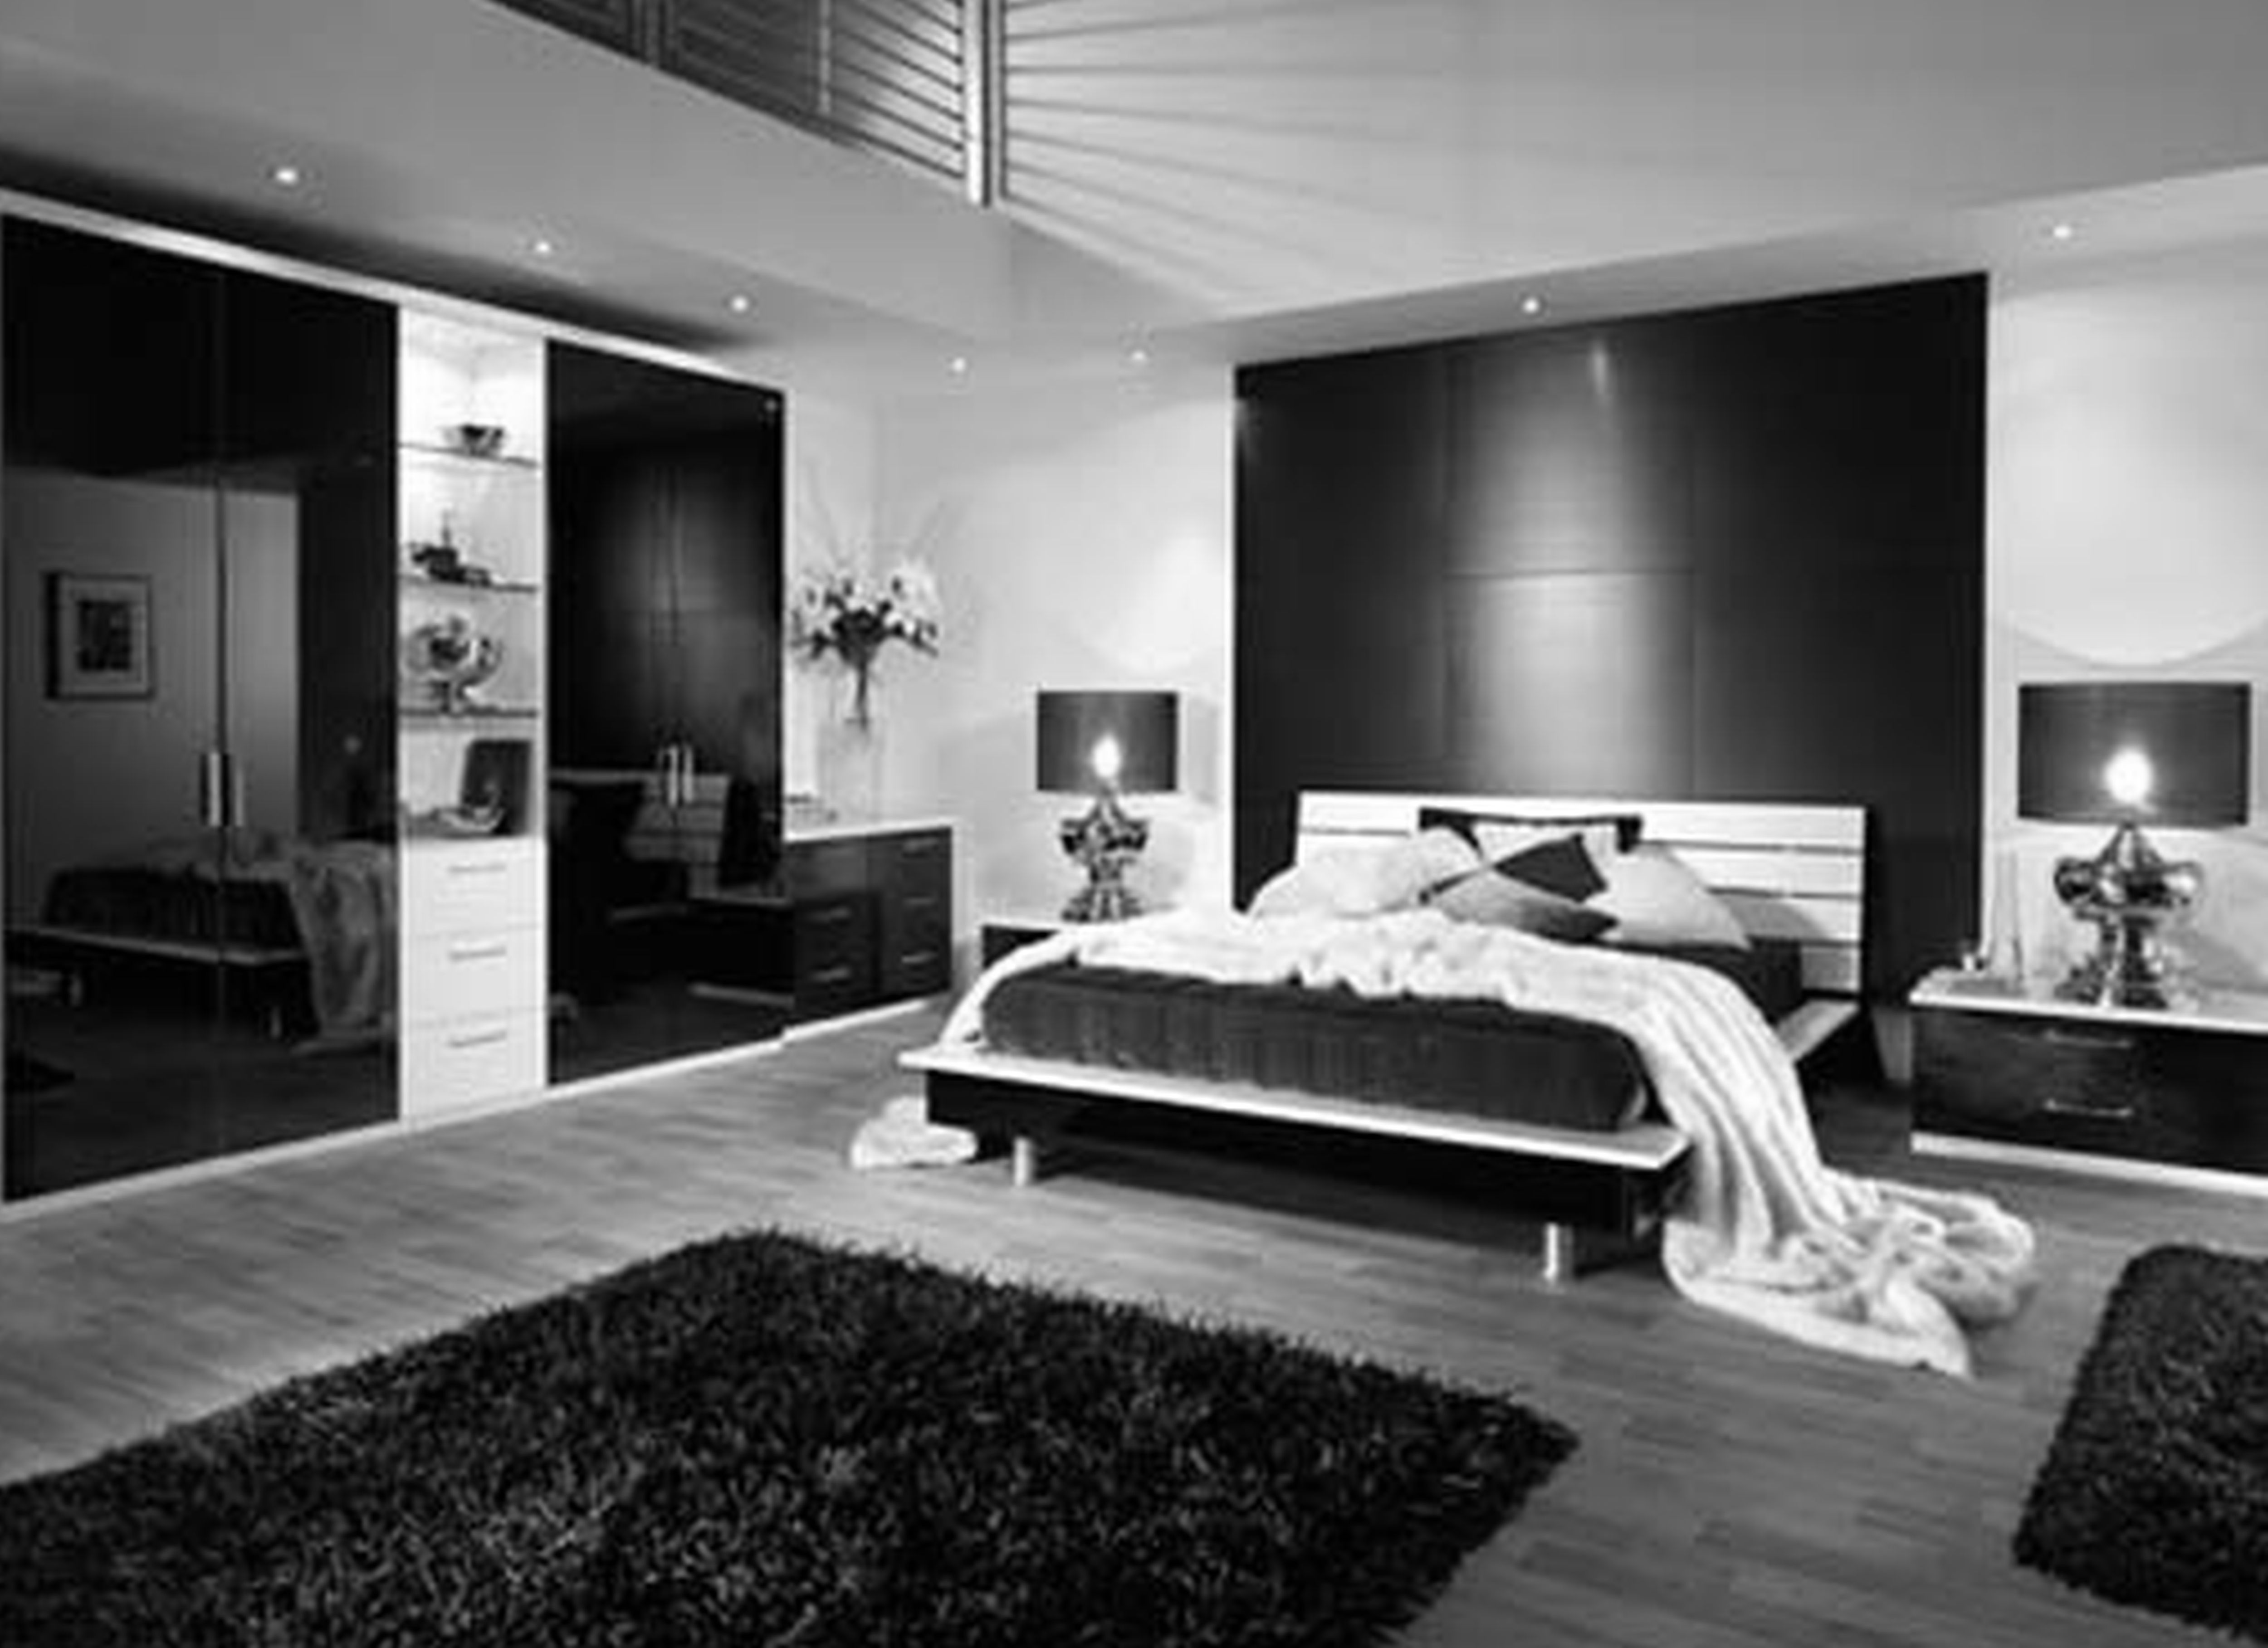 A Modern Black And White Bedroom